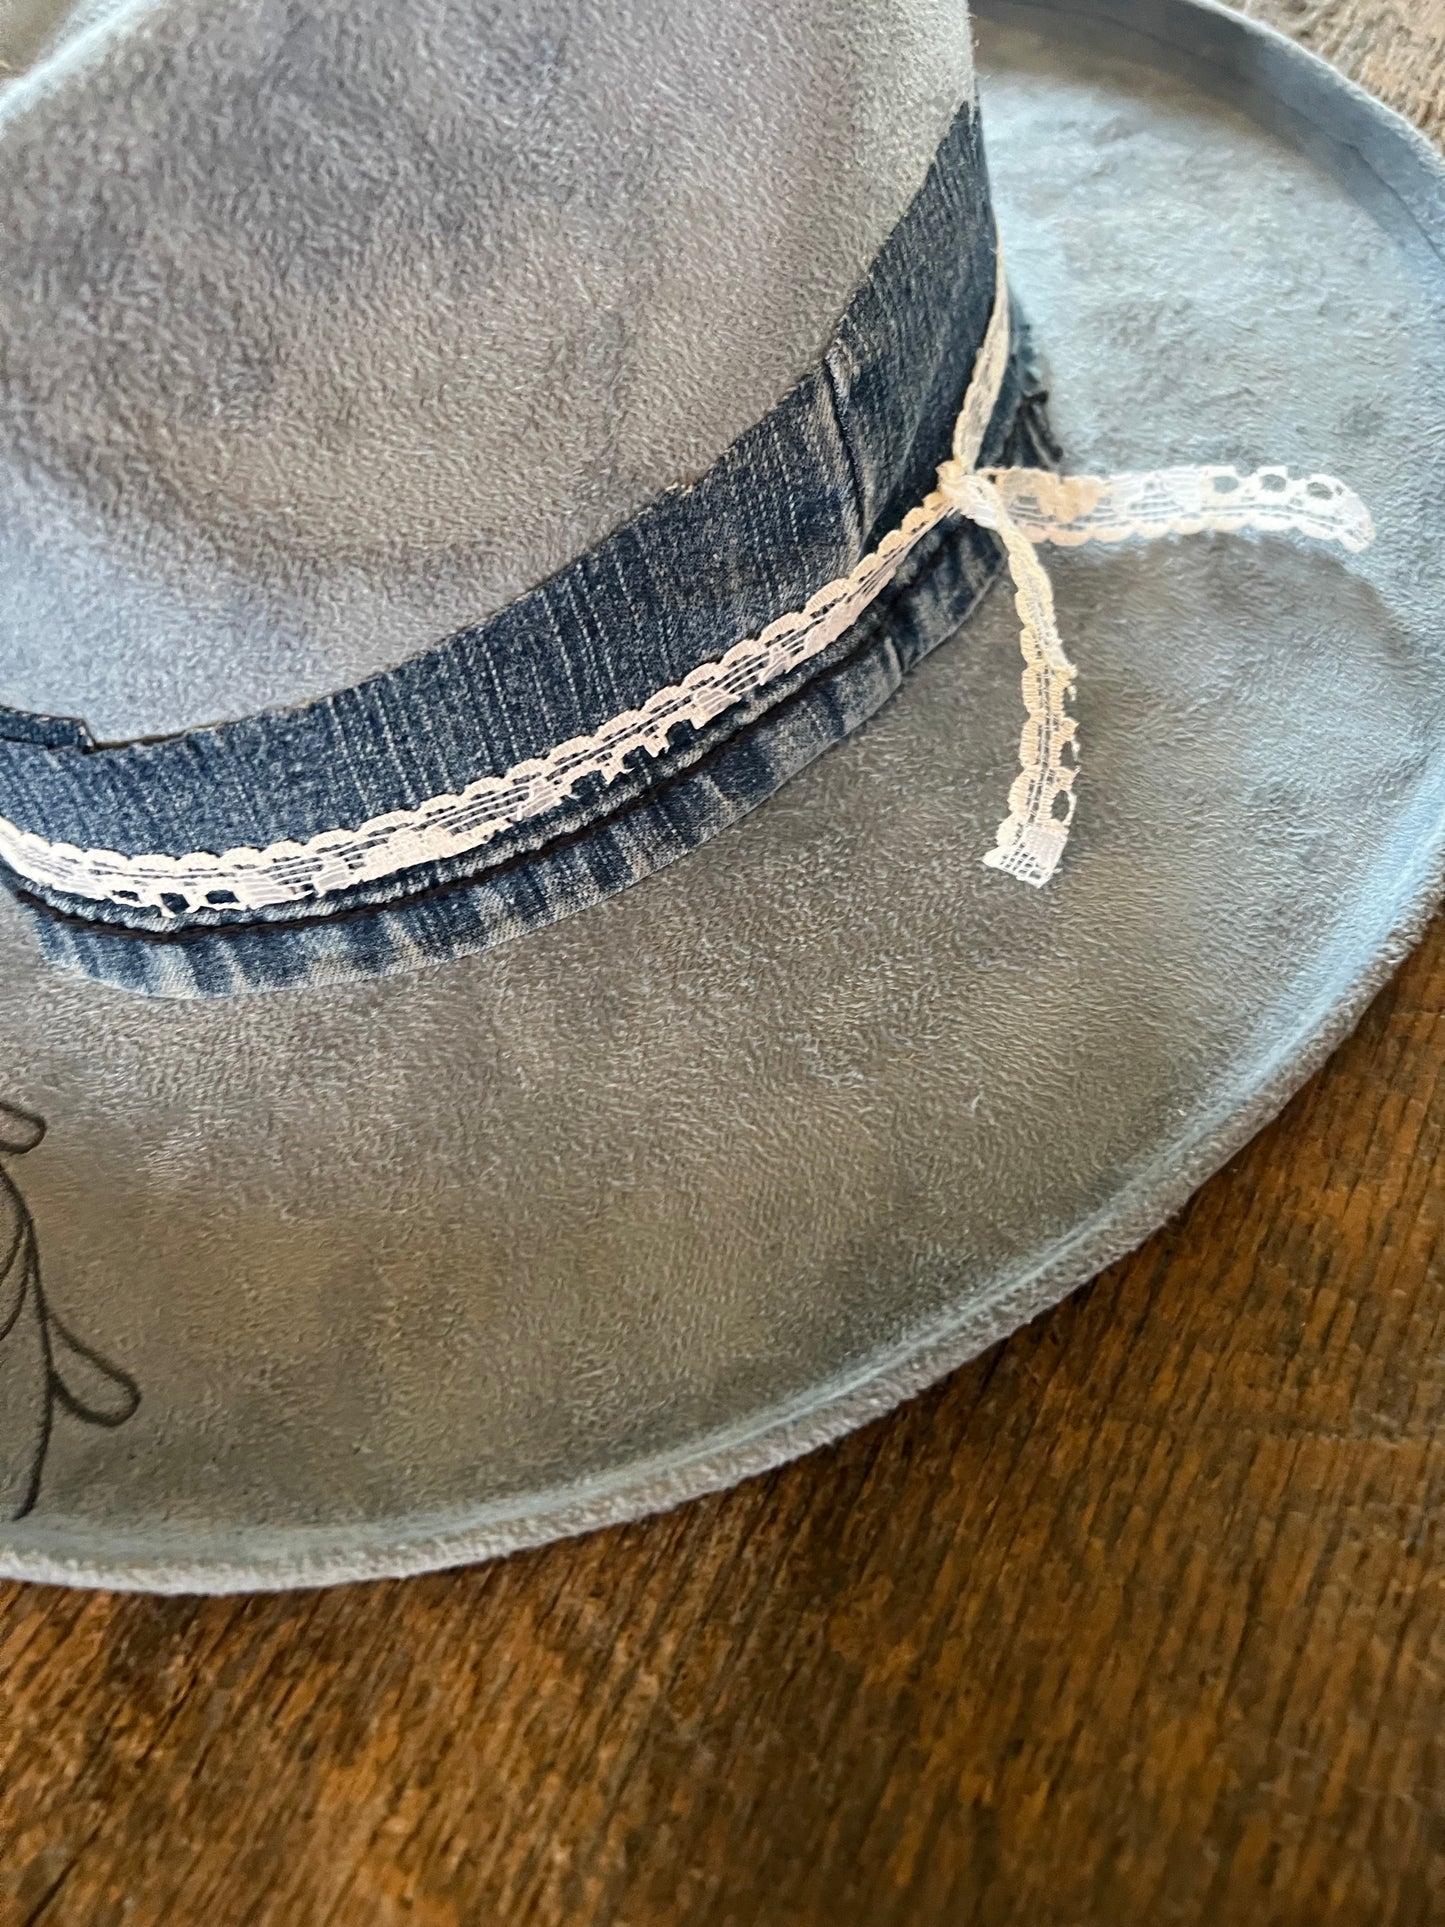 #160 - Blue Denim and Lace with Wildflowers Western or Rancher Hat